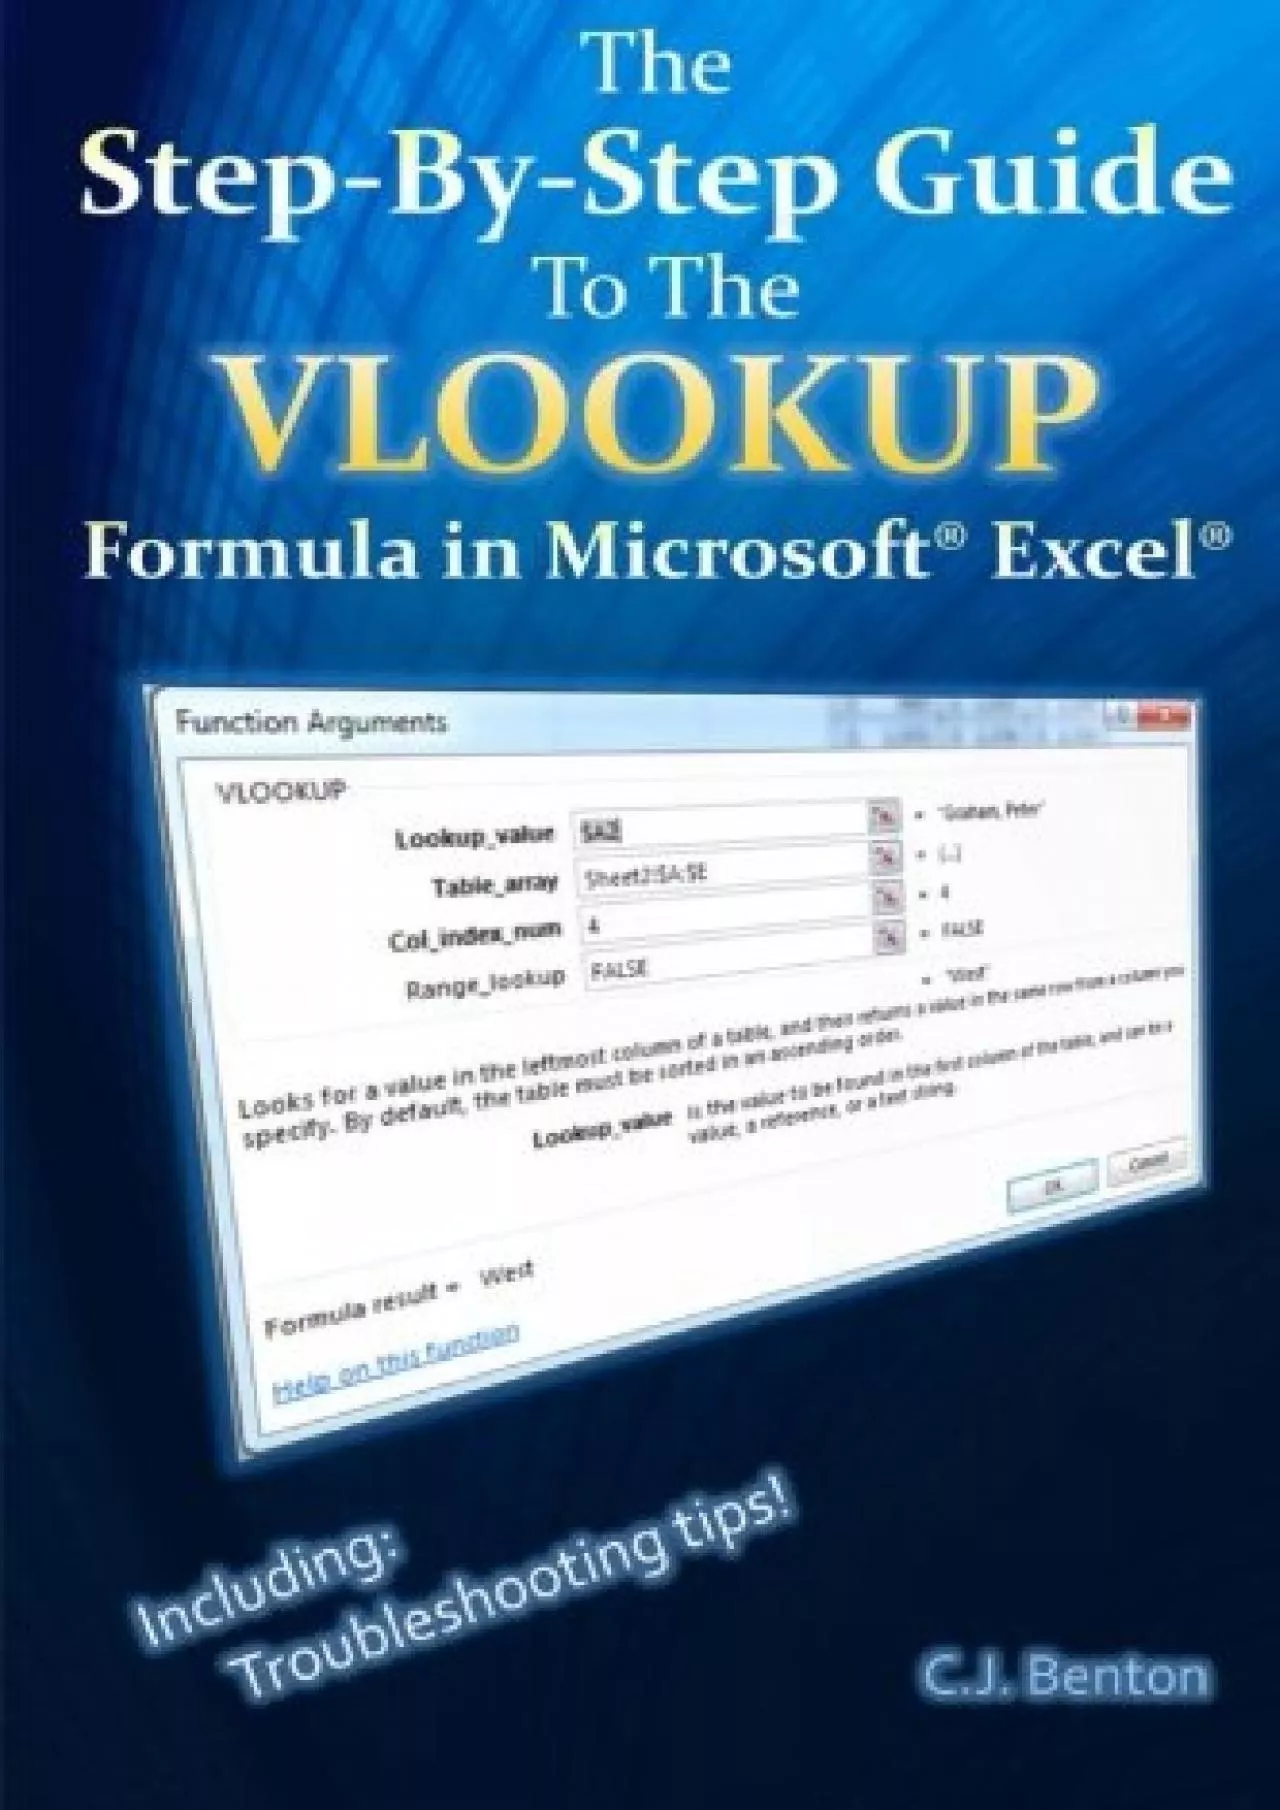 The Step-By-Step Guide To The VLOOKUP formula in Microsoft Excel (The Microsoft Excel